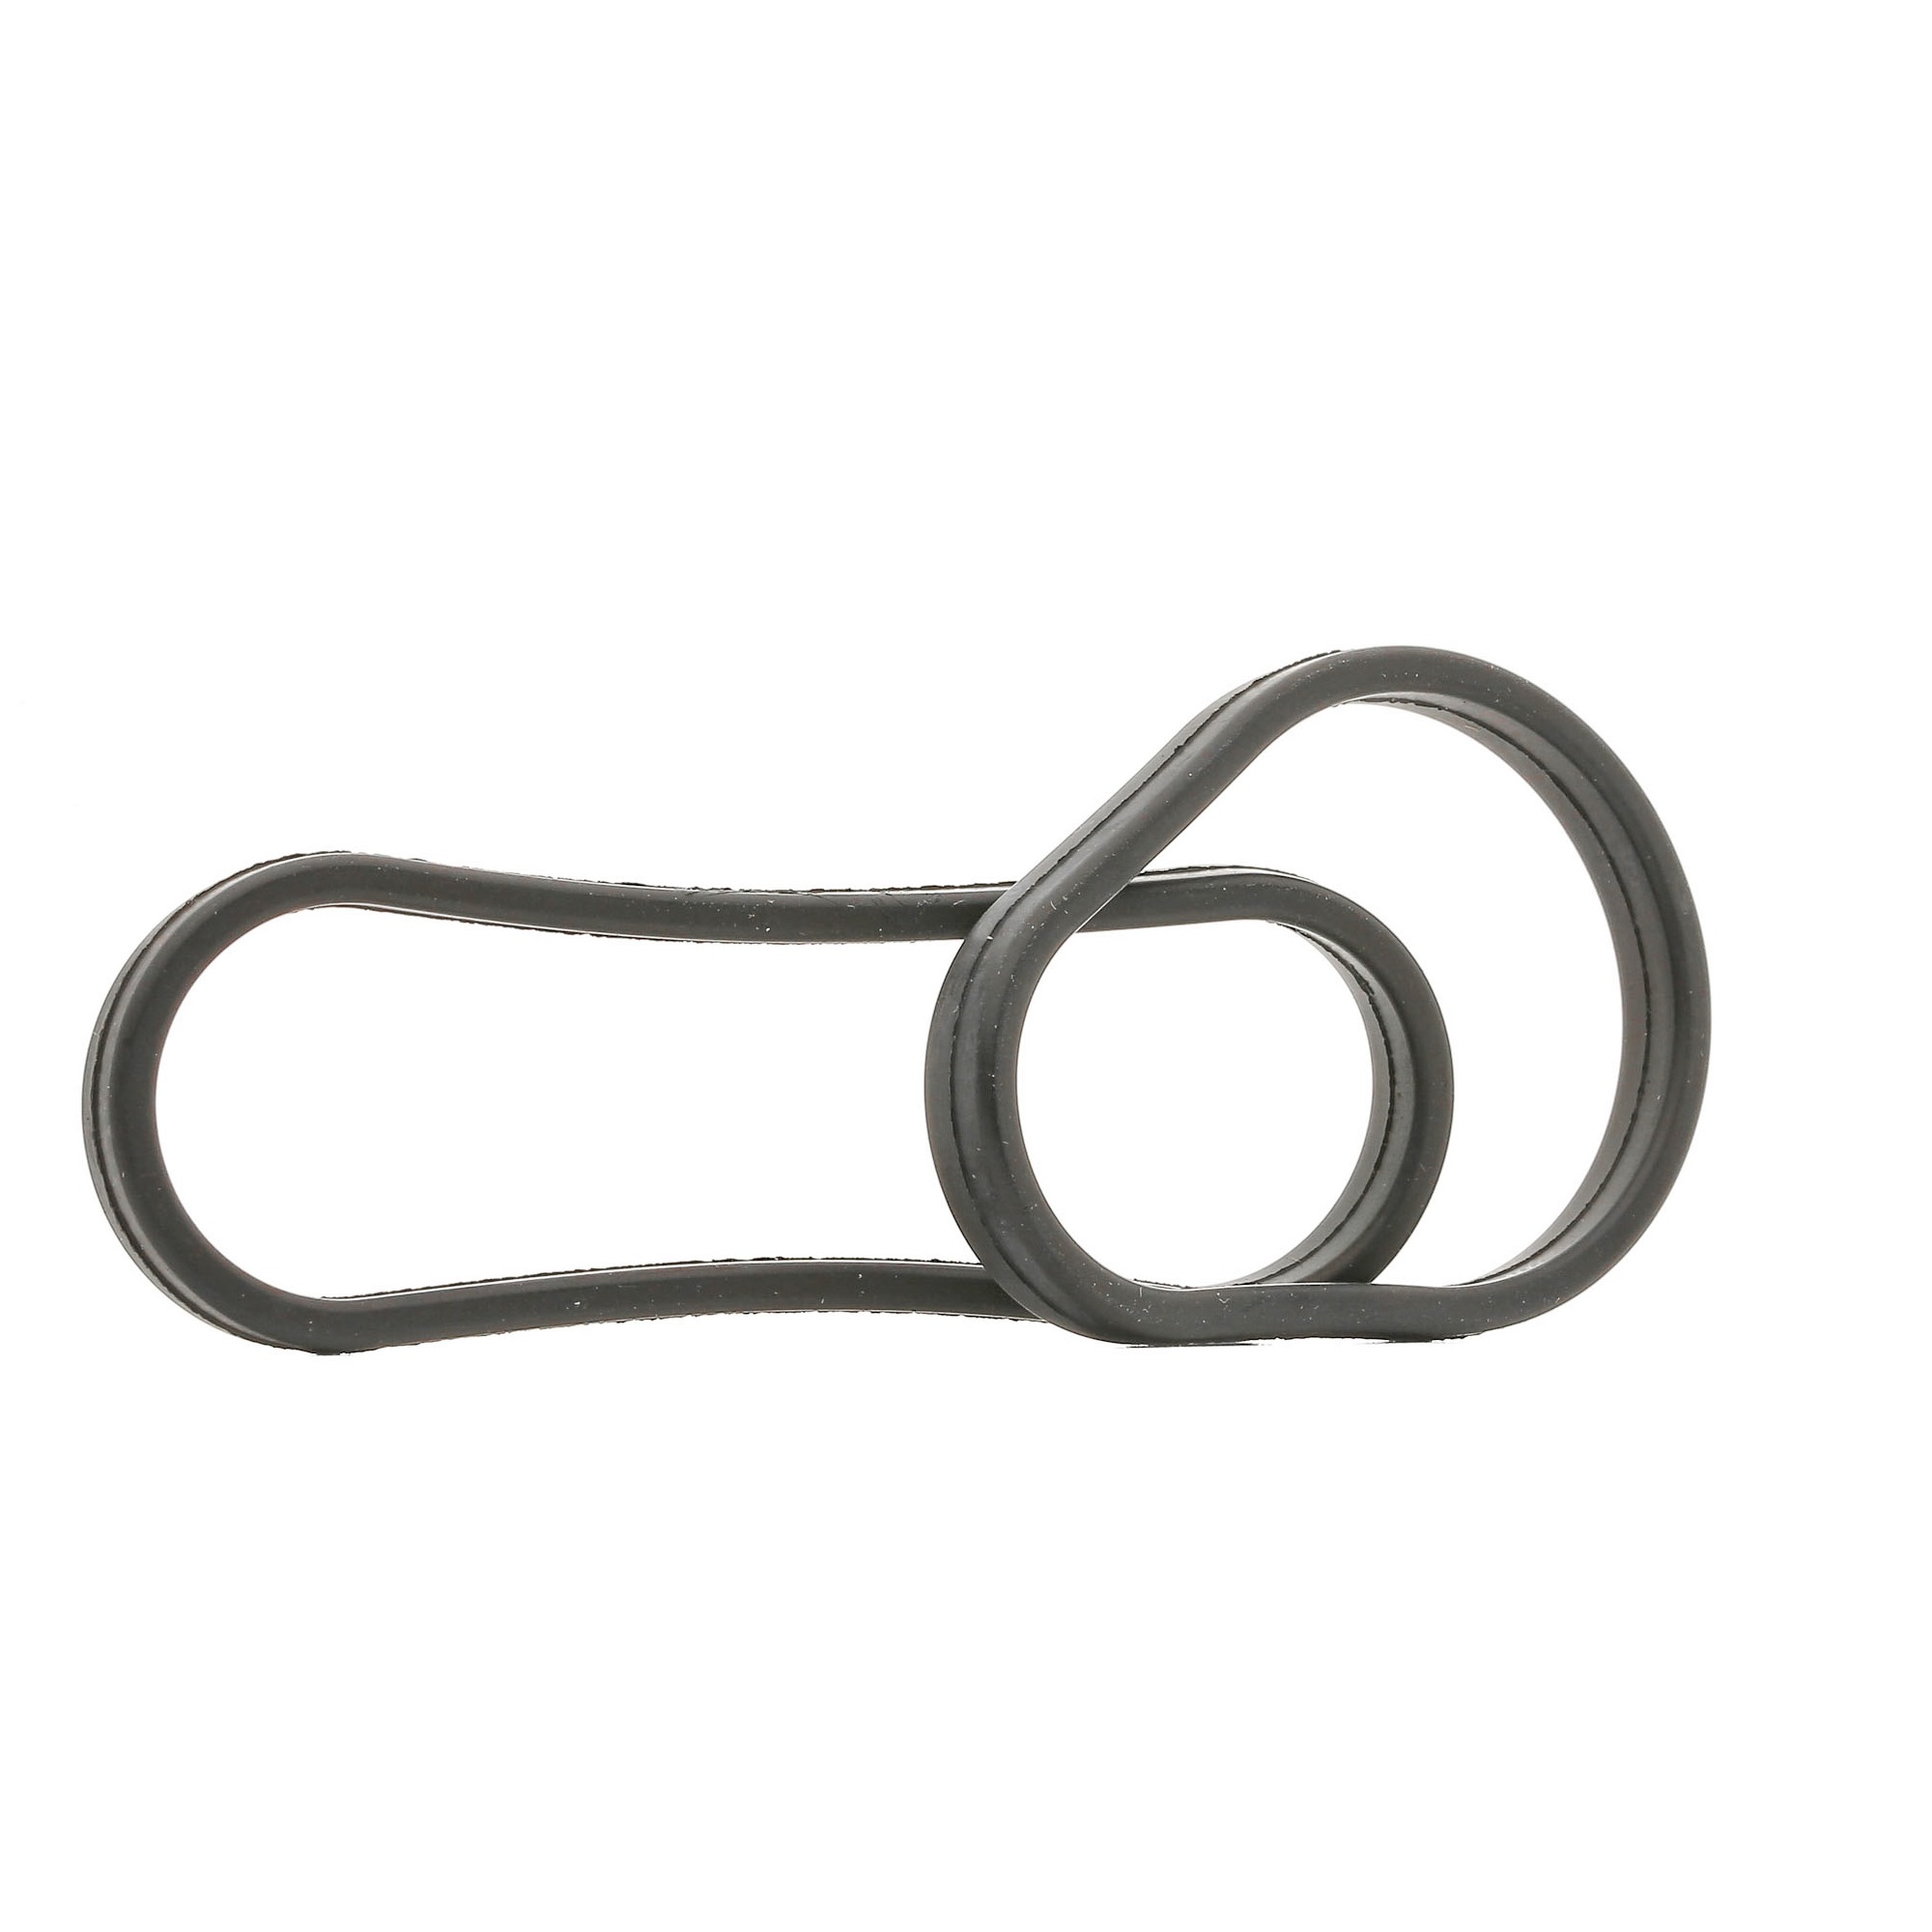 Opel MOVANO Oil cooler seal 13580326 ELRING 868.220 online buy